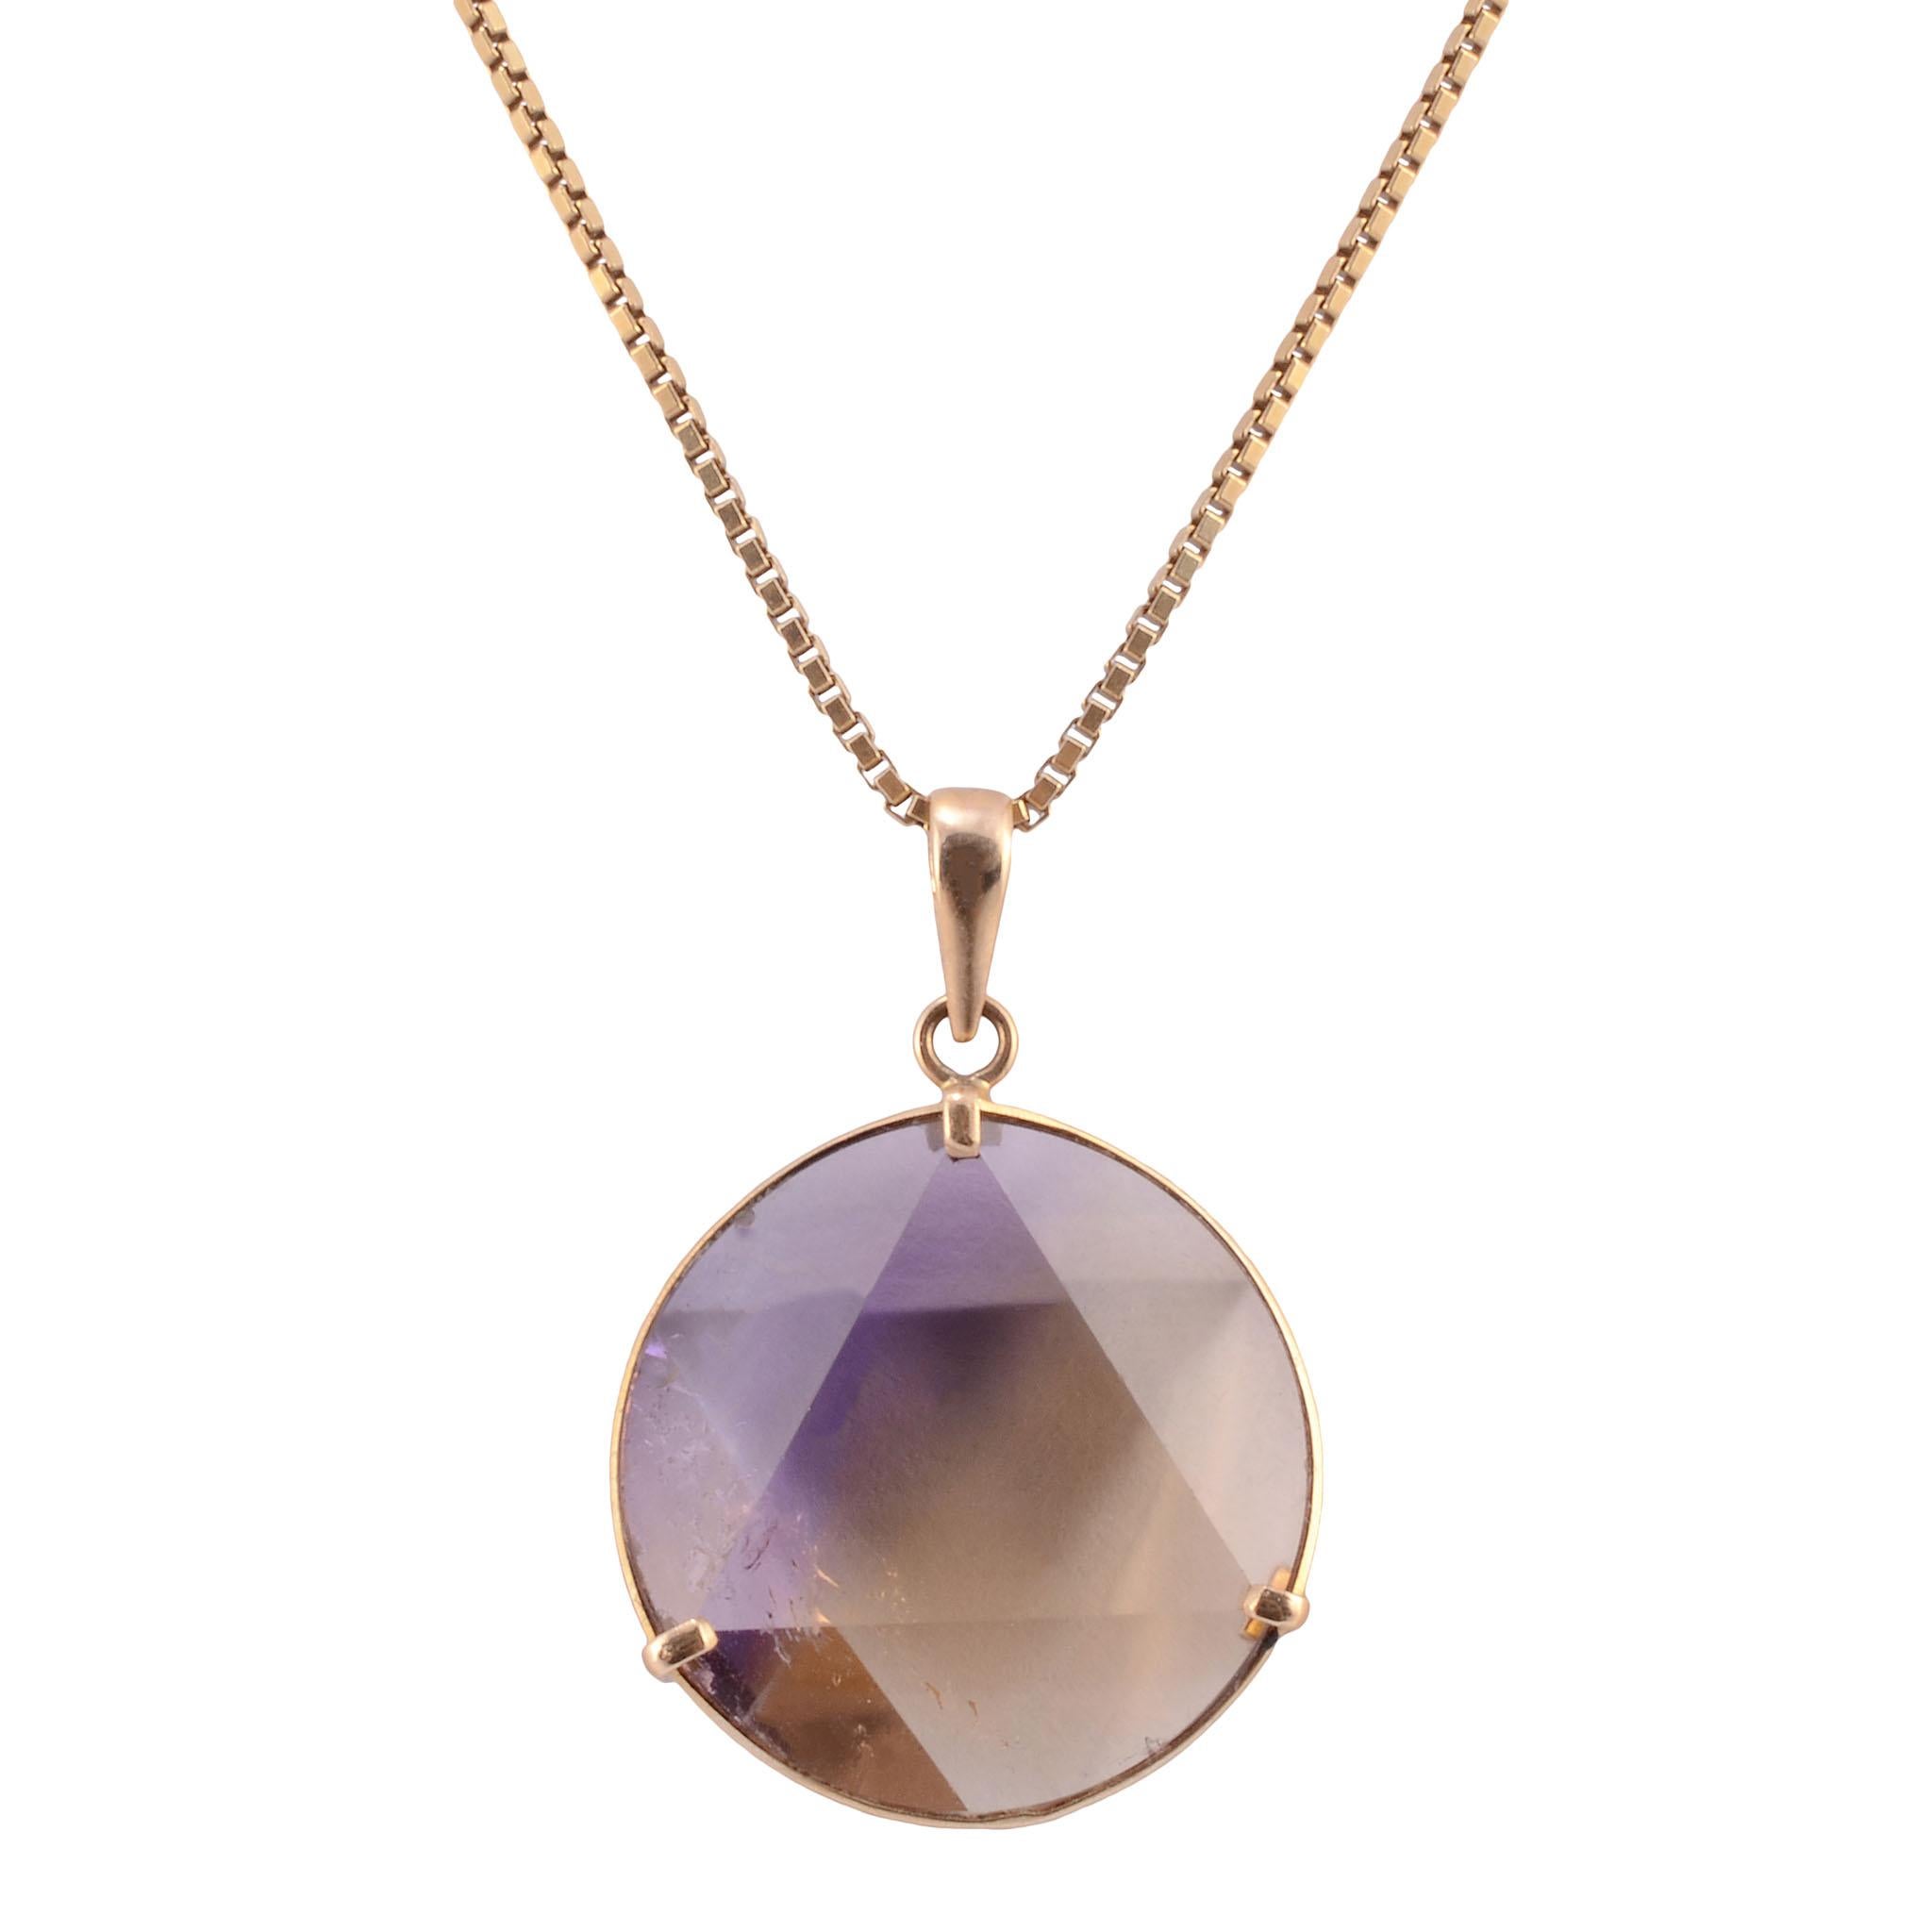 Vintage 20.67 carat ametrine 18K pendant on chain, circa 1960. This 18 karat yellow gold pendant features a round faceted ametrine at 20.67 carats. [MICO 800]

Dimensions
20mm Diameter ametrine; 20″L chain